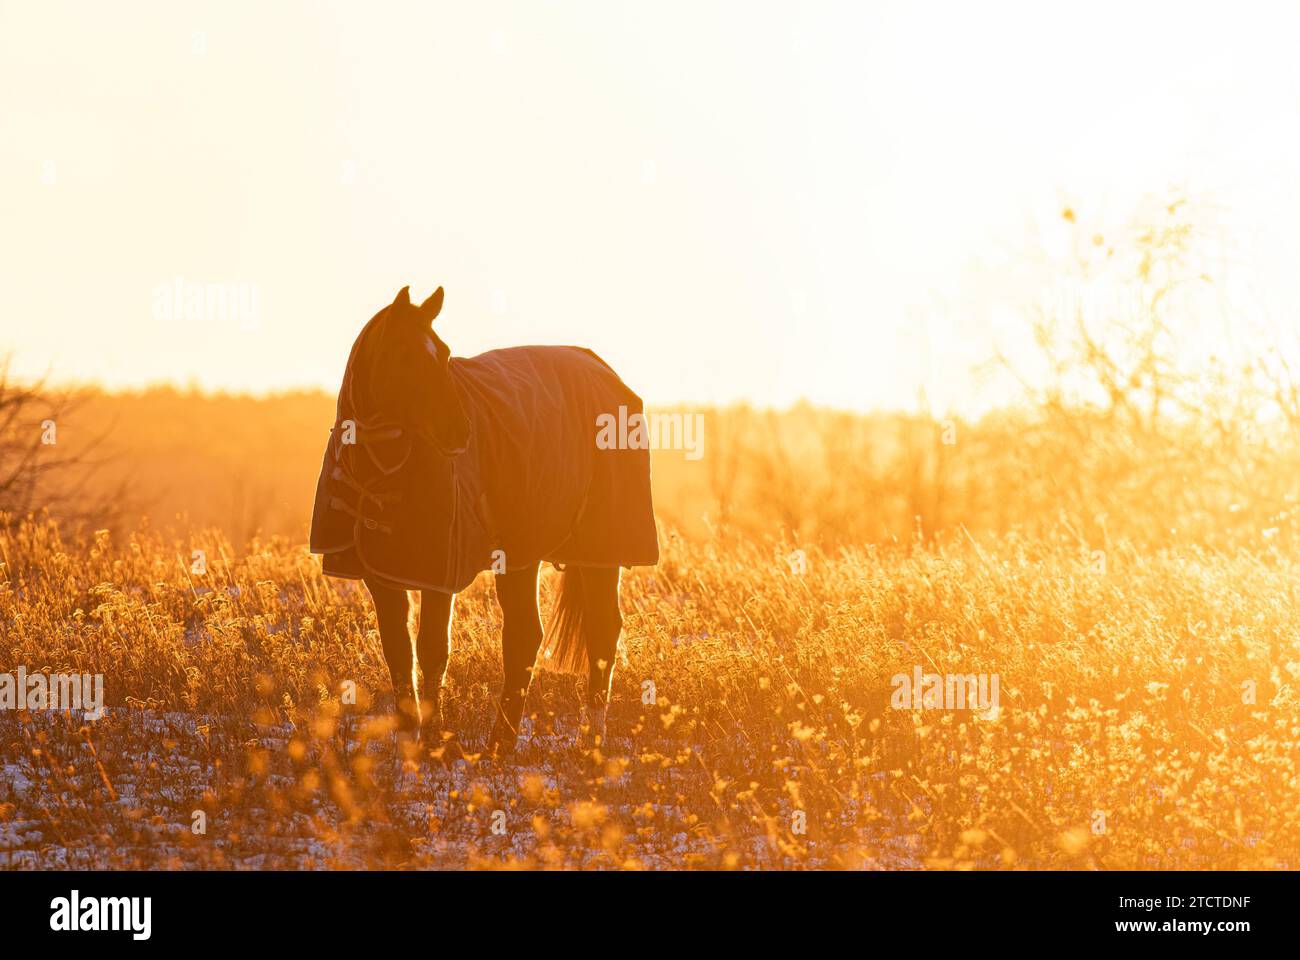 Horse silhouette standing in an autumn meadow at sunset Stock Photo